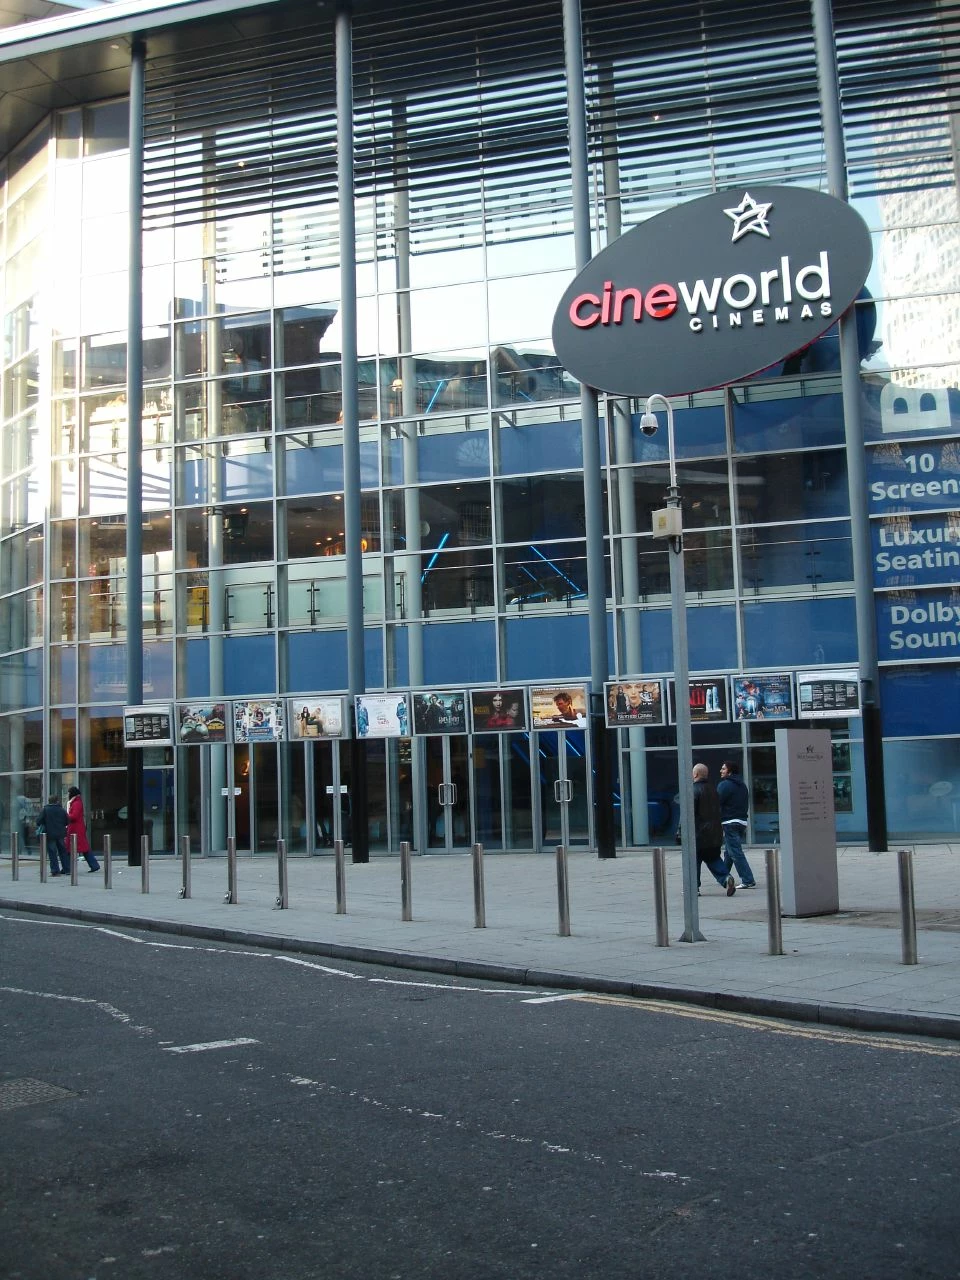 Cineworld at the docklands